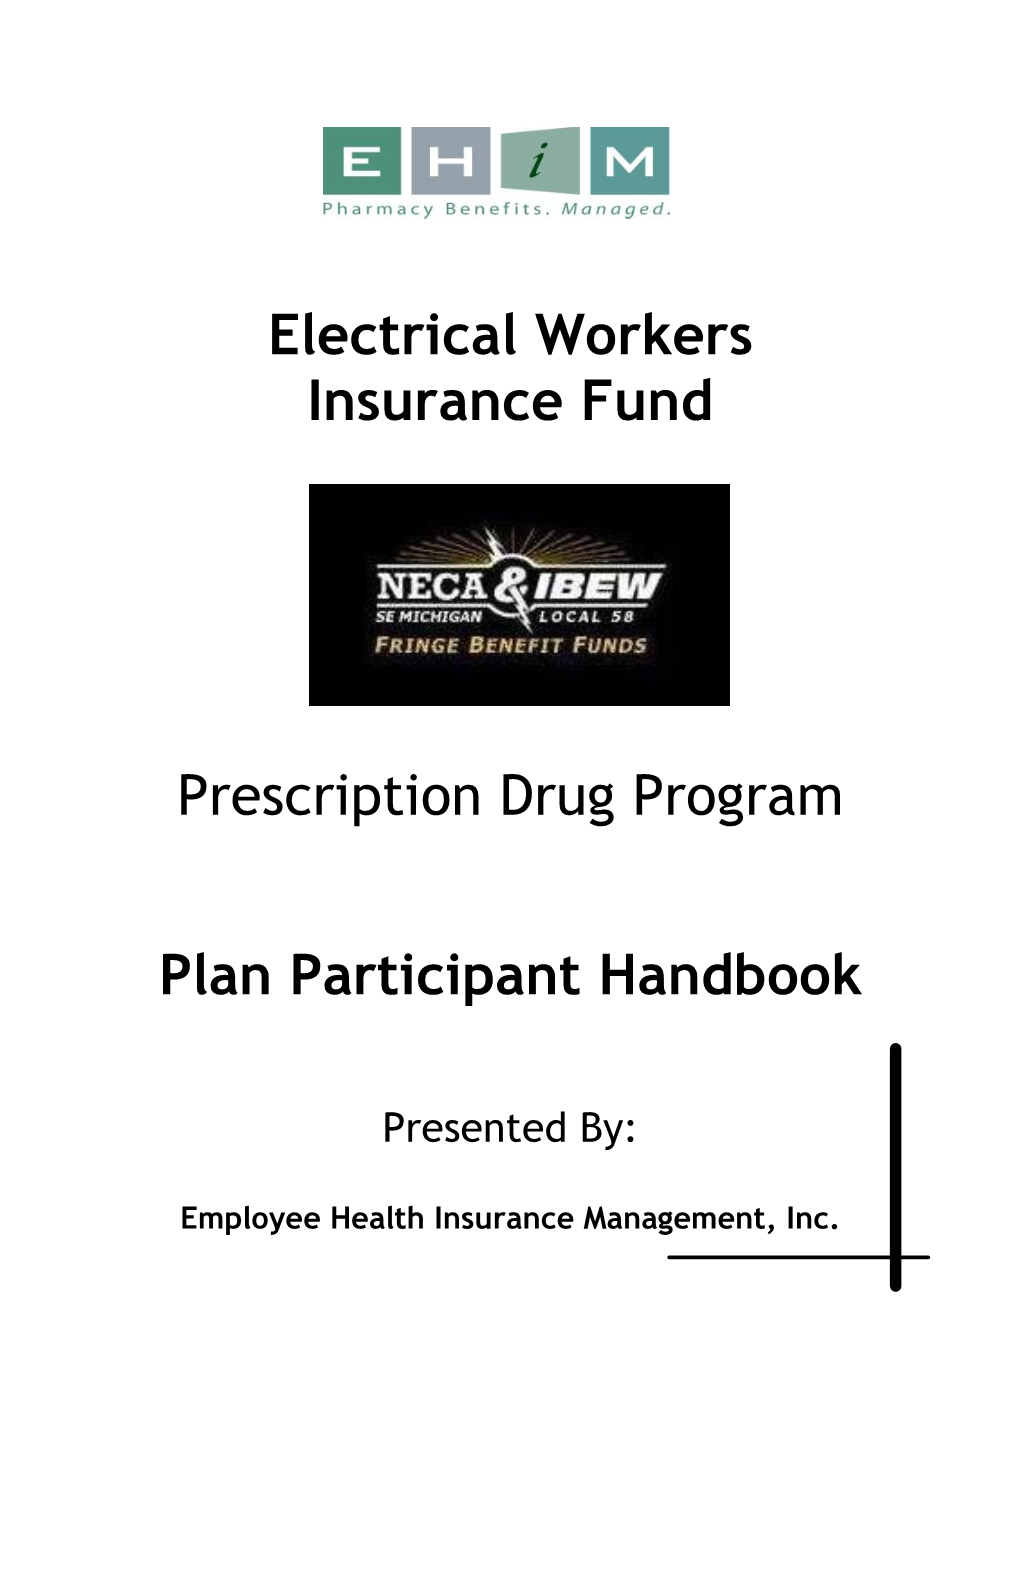 General Information the Electrical Workers Insurance Fund Prescription Drug Program Is a Part of the Electrical Workers Insurance Fund